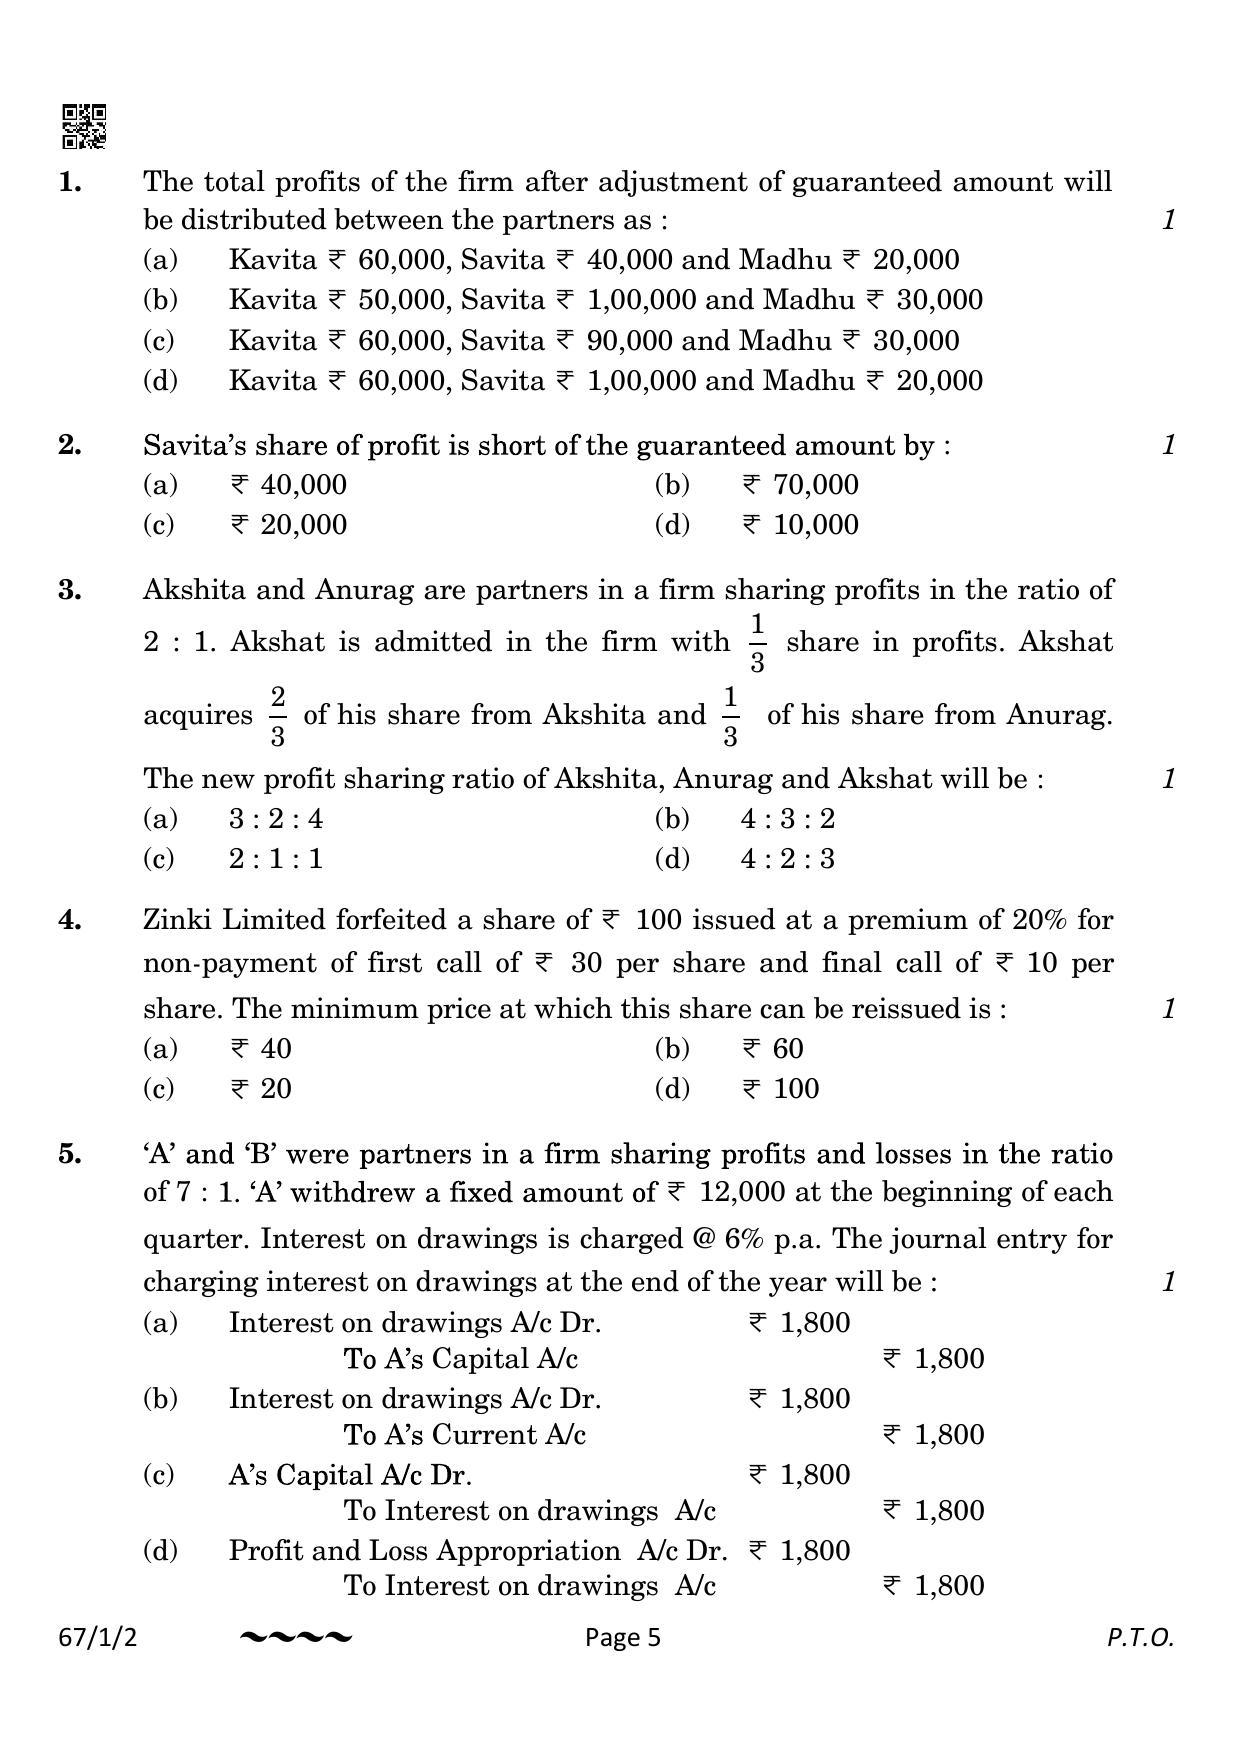 CBSE Class 12 67-1-2 Accountancy 2023 Question Paper - Page 5